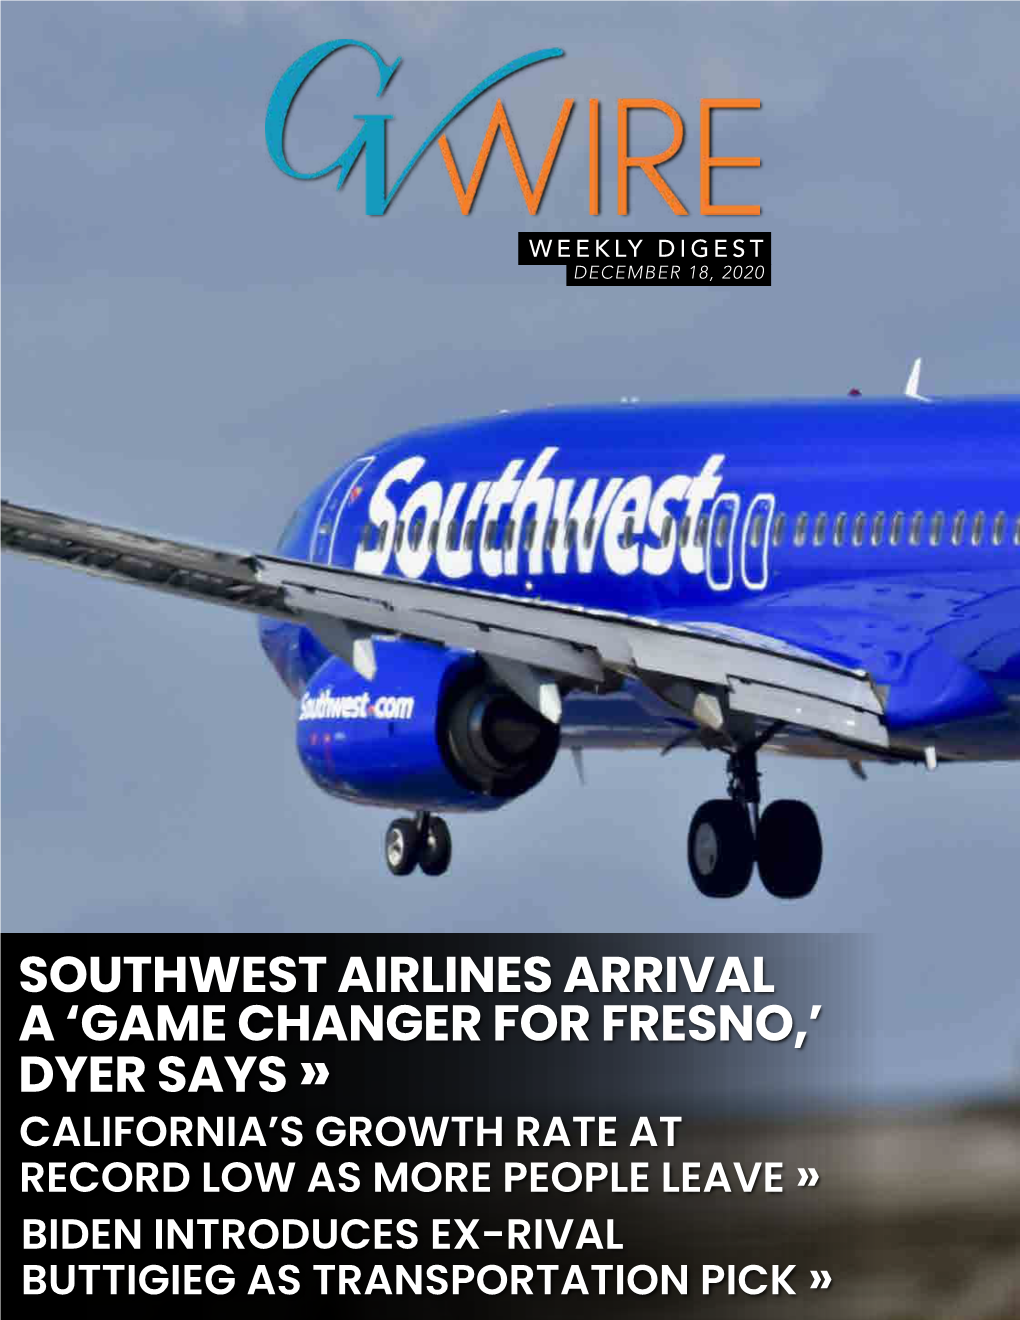 Southwest Airlines Arrival a 'Game Changer for Fresno